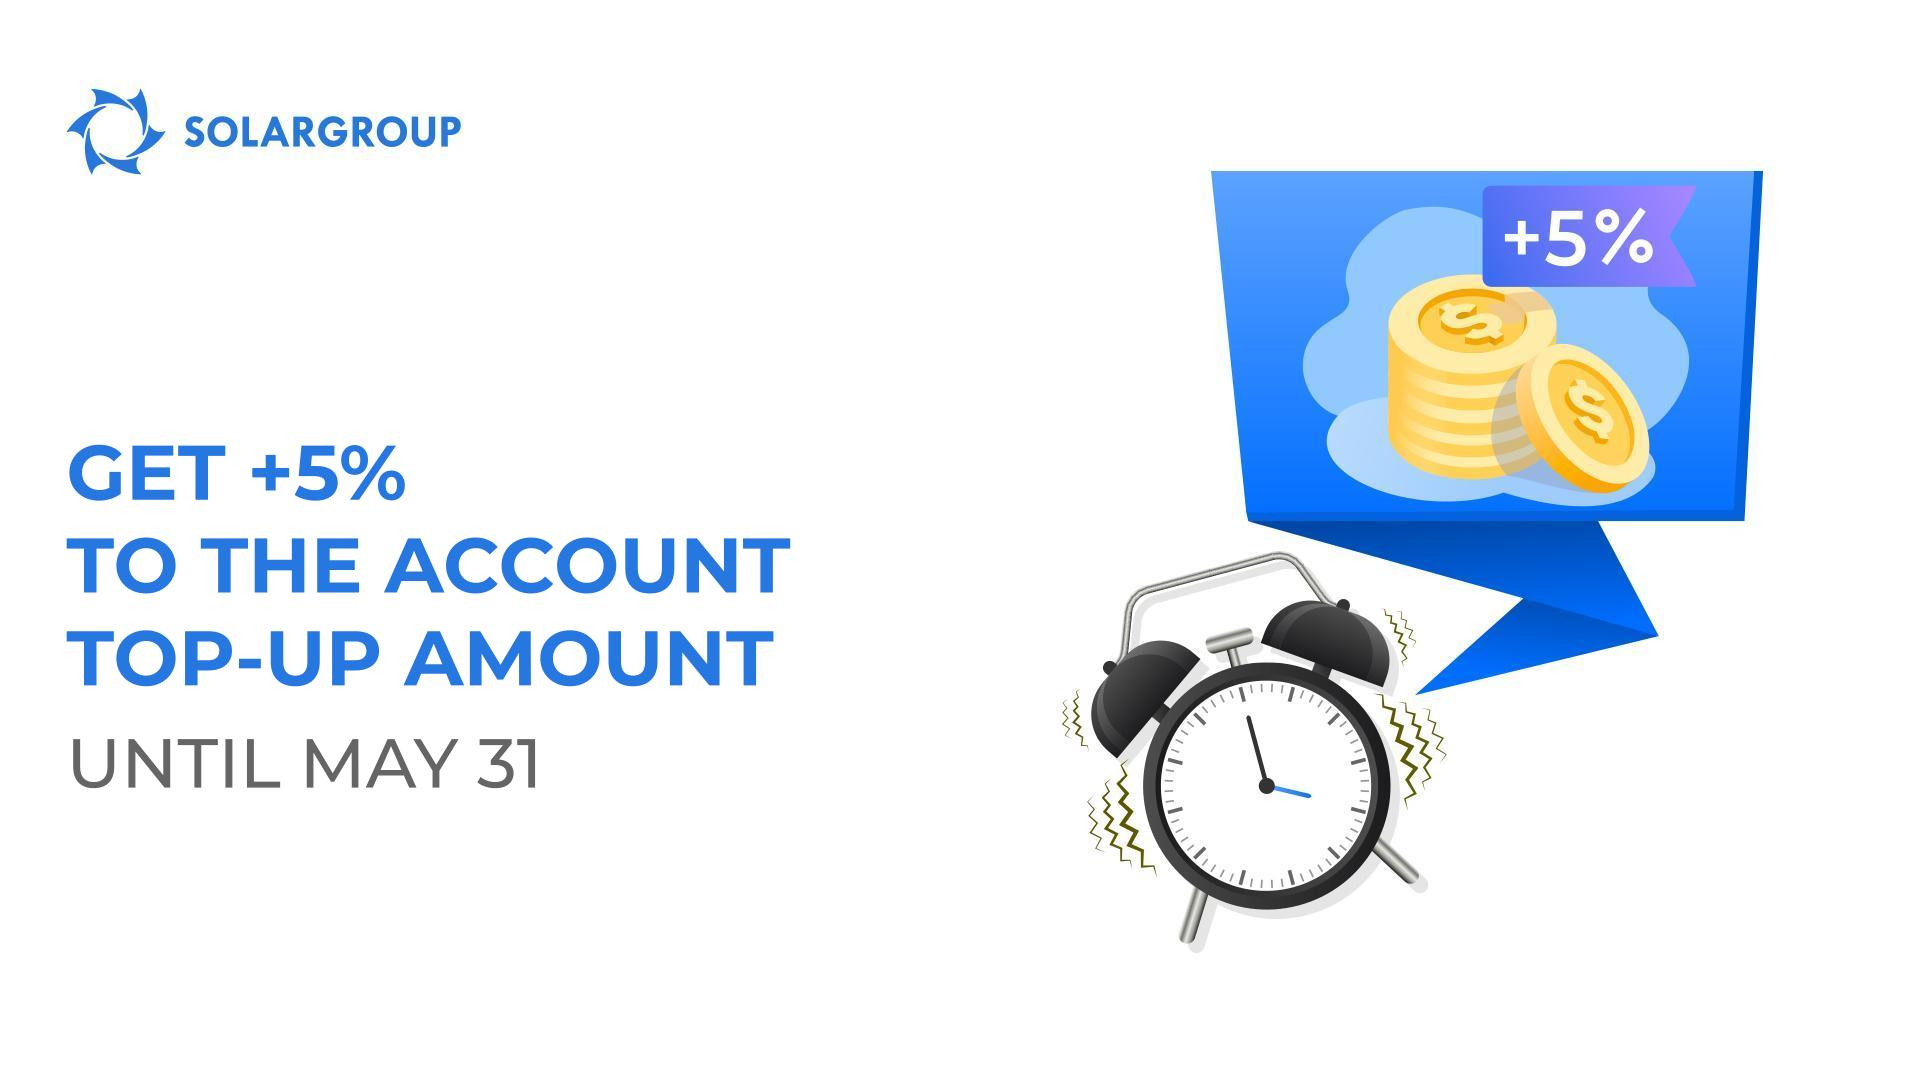 Last week of the "+5% to the account top-up" offer